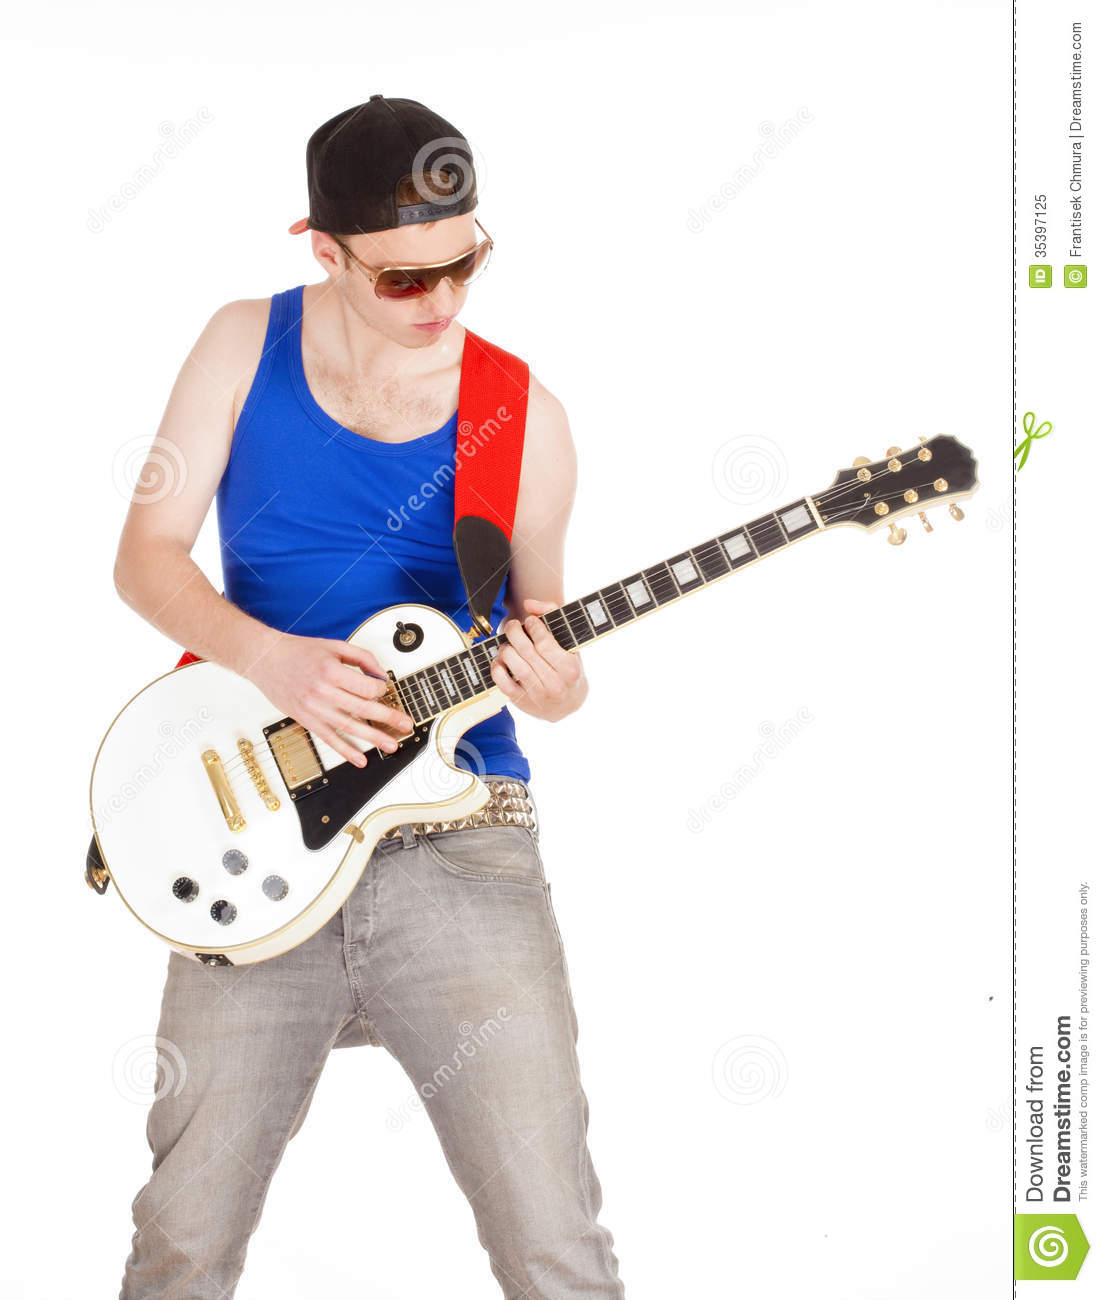 Teenage Boy With Sunglasses Playing Electric Guitar Royalty Free Stock